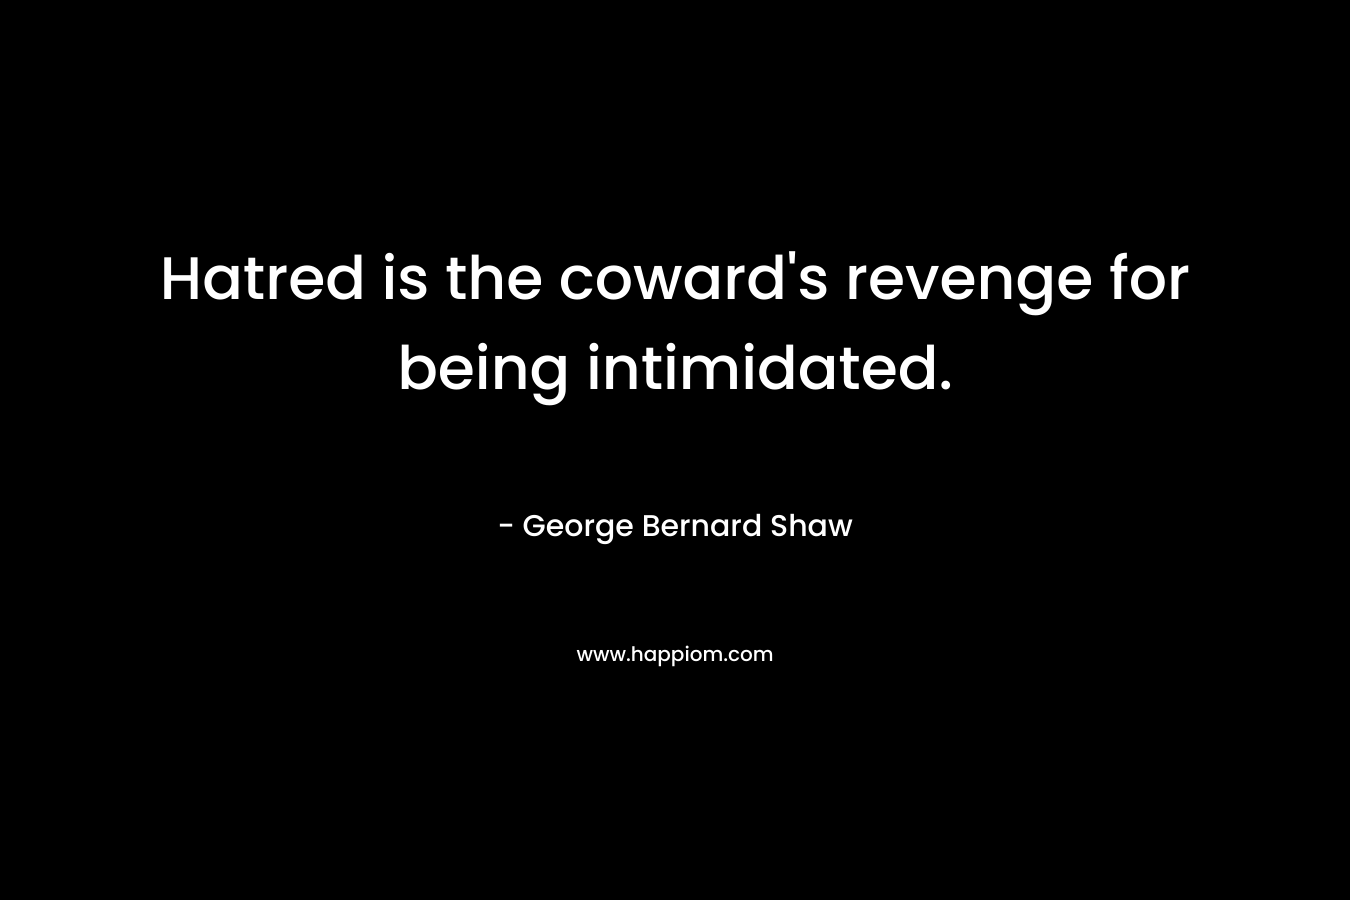 Hatred is the coward’s revenge for being intimidated. – George Bernard Shaw